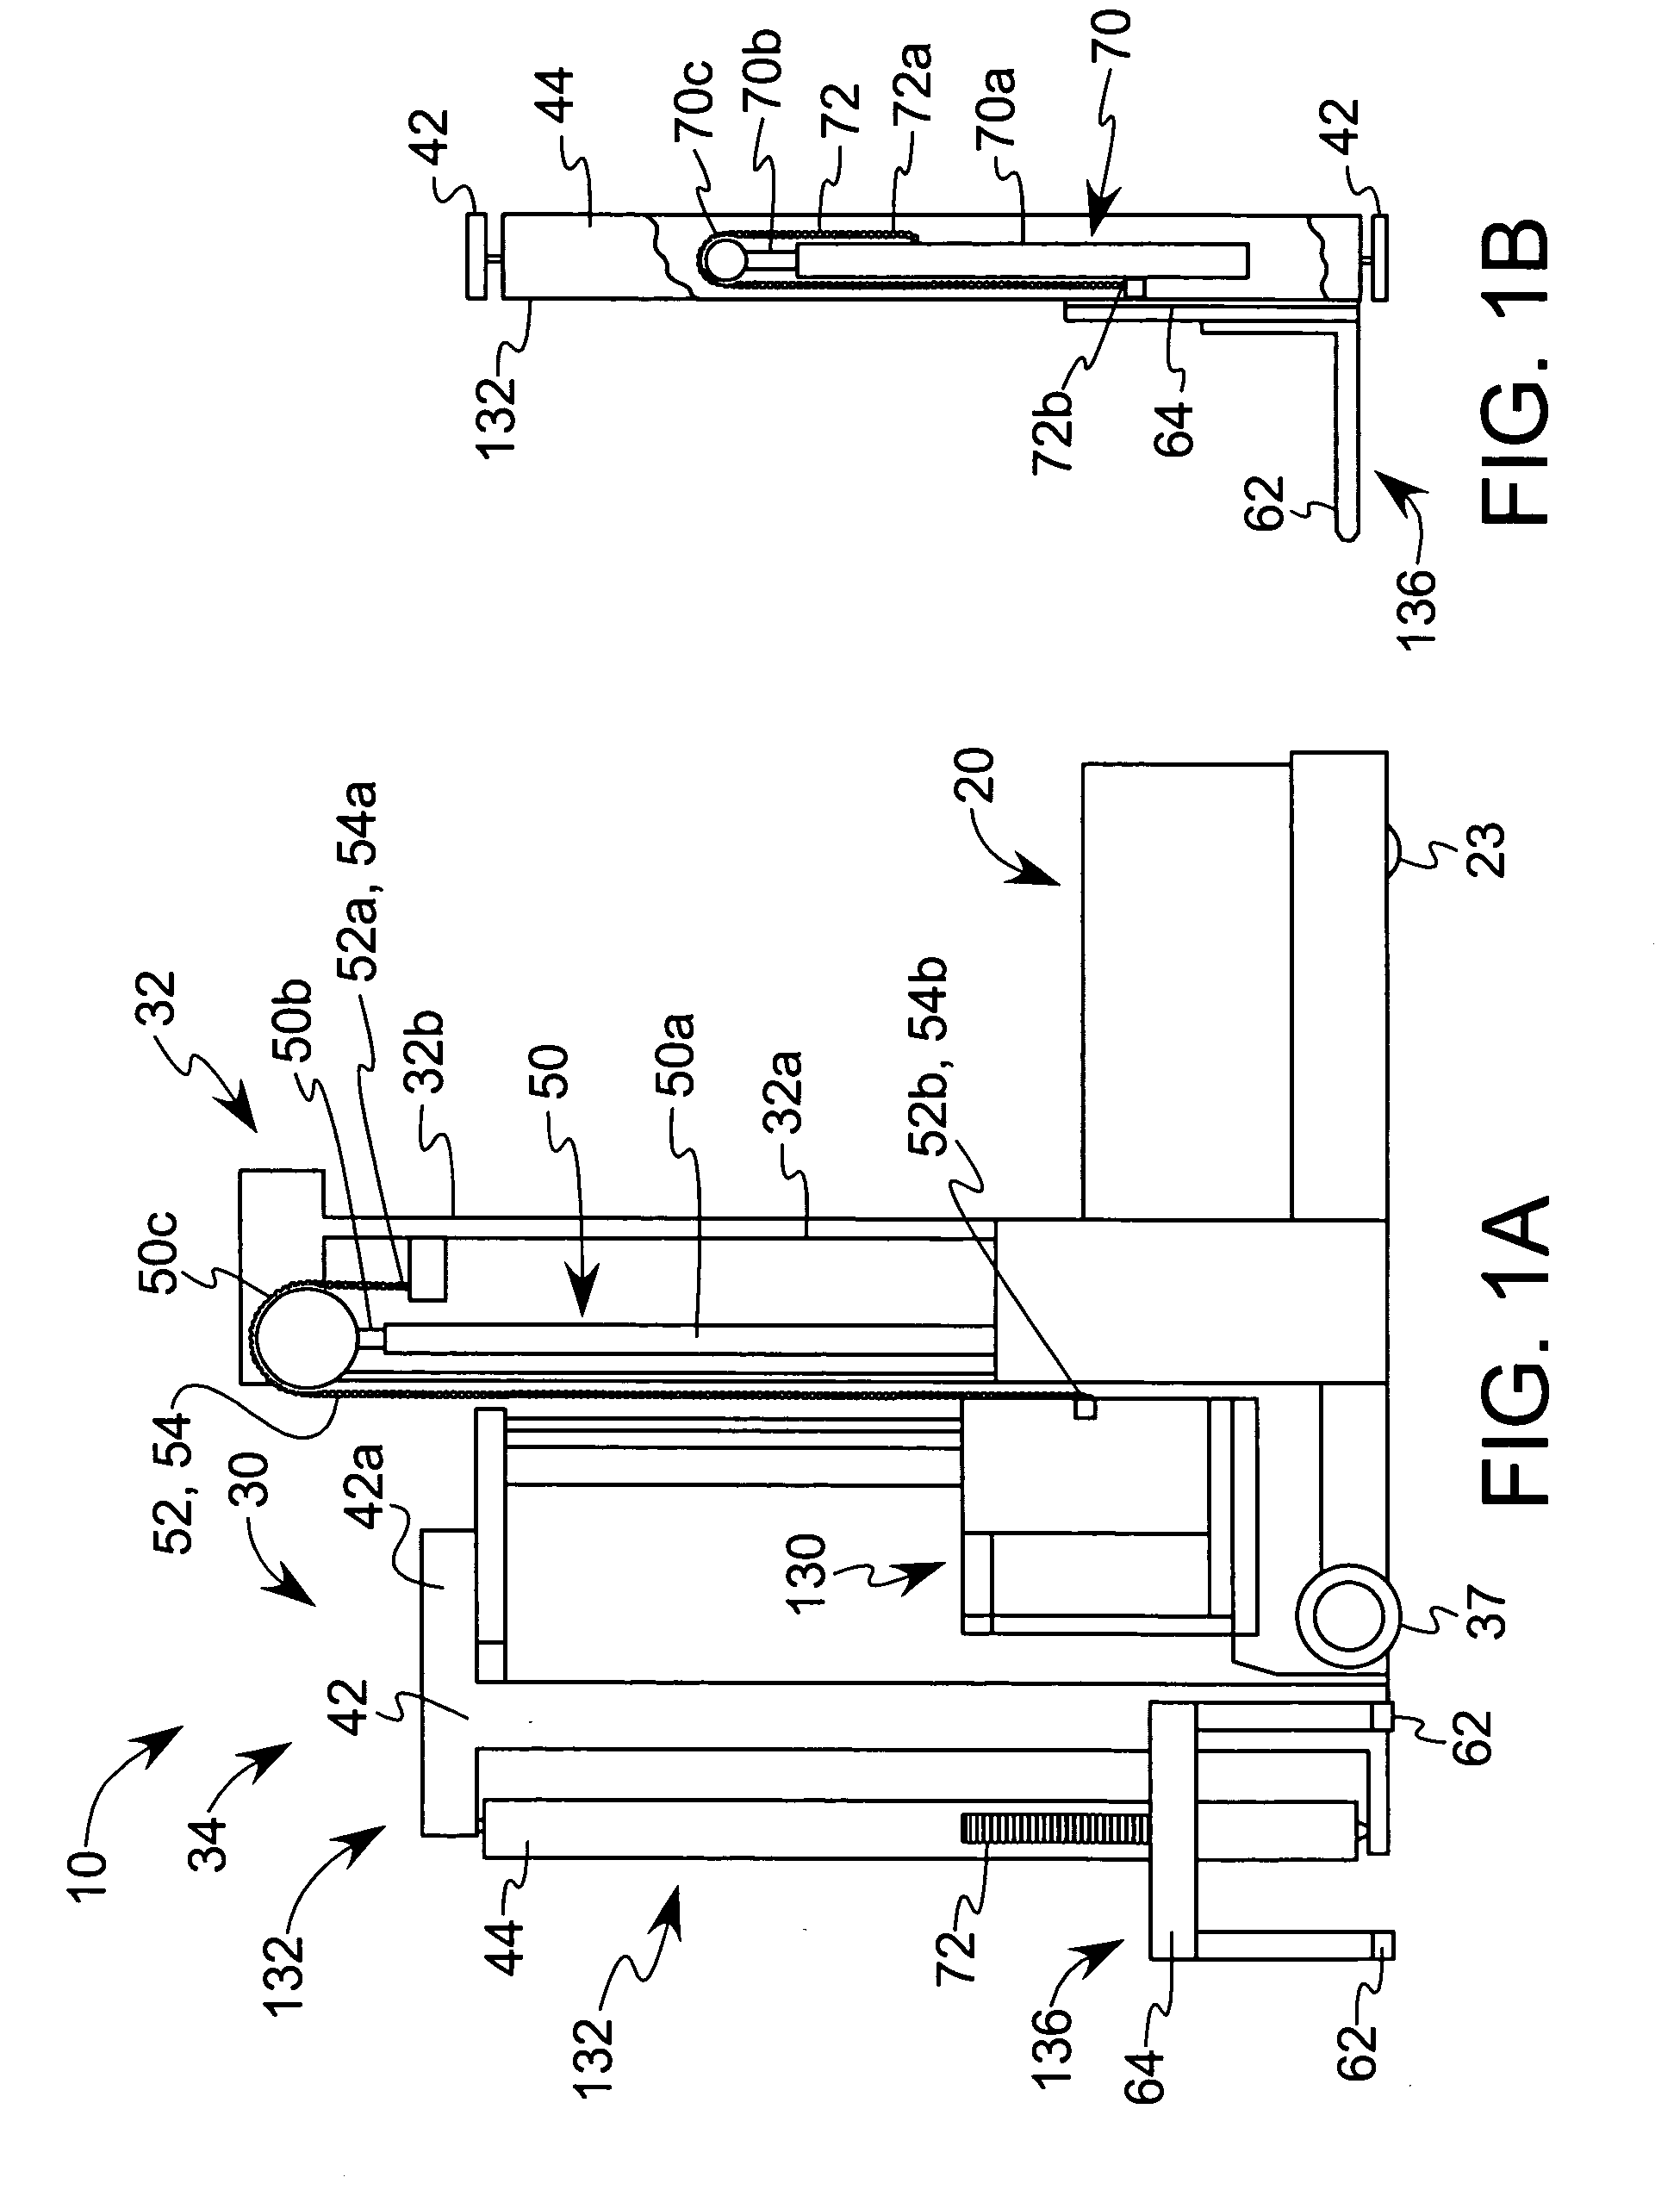 Materials handling vehicle having substantially all hydraulic components mounted on a main frame assembly